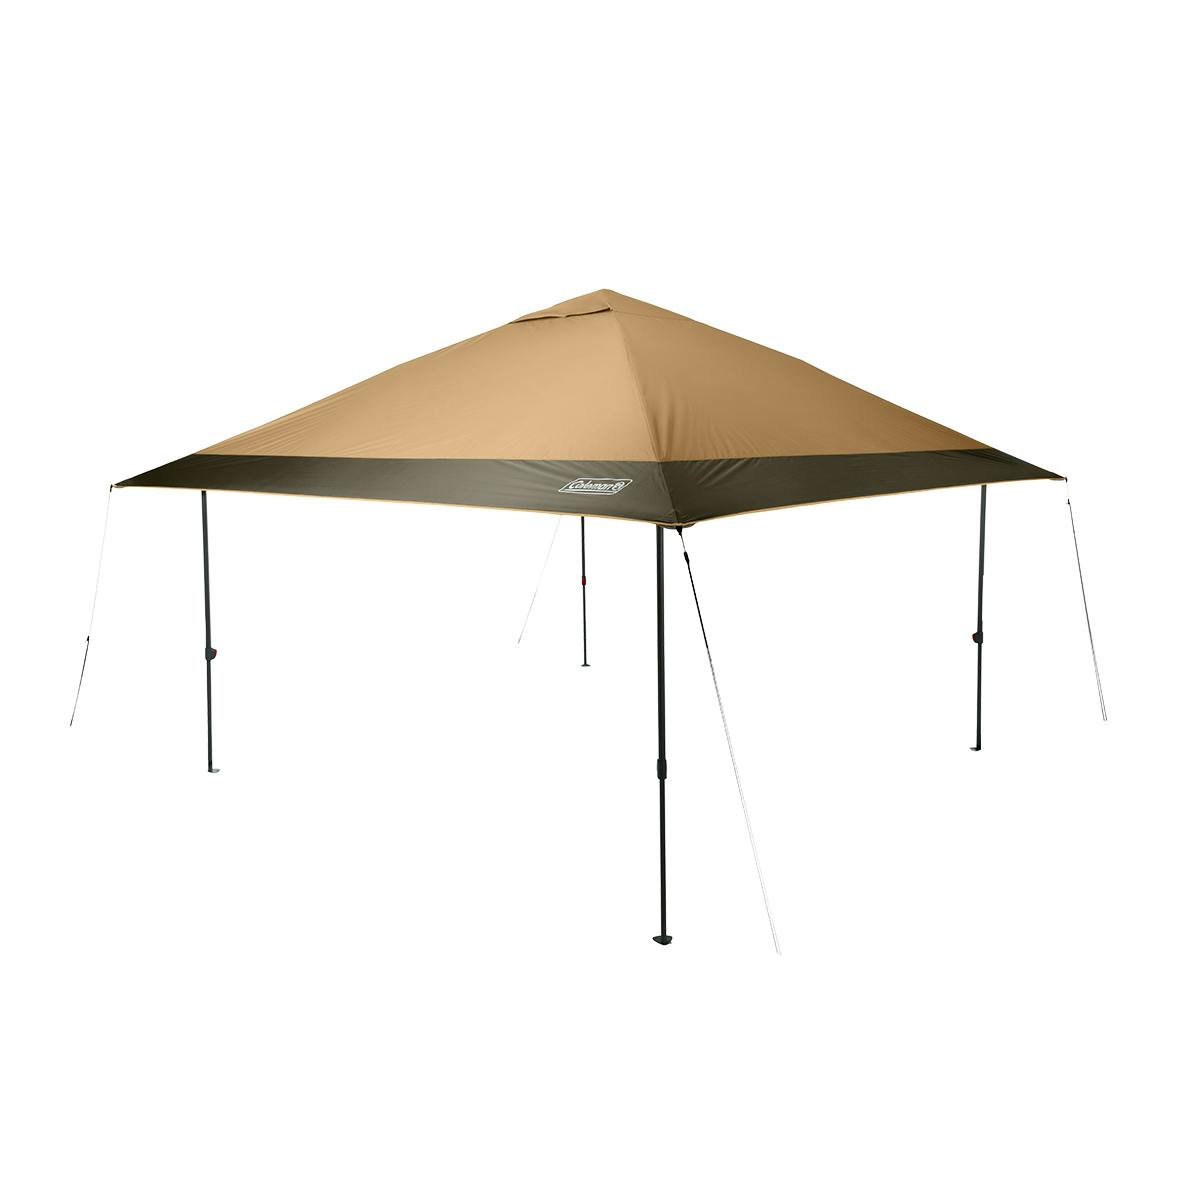 OASIS™ 13 x 13 Canopy | Coleman